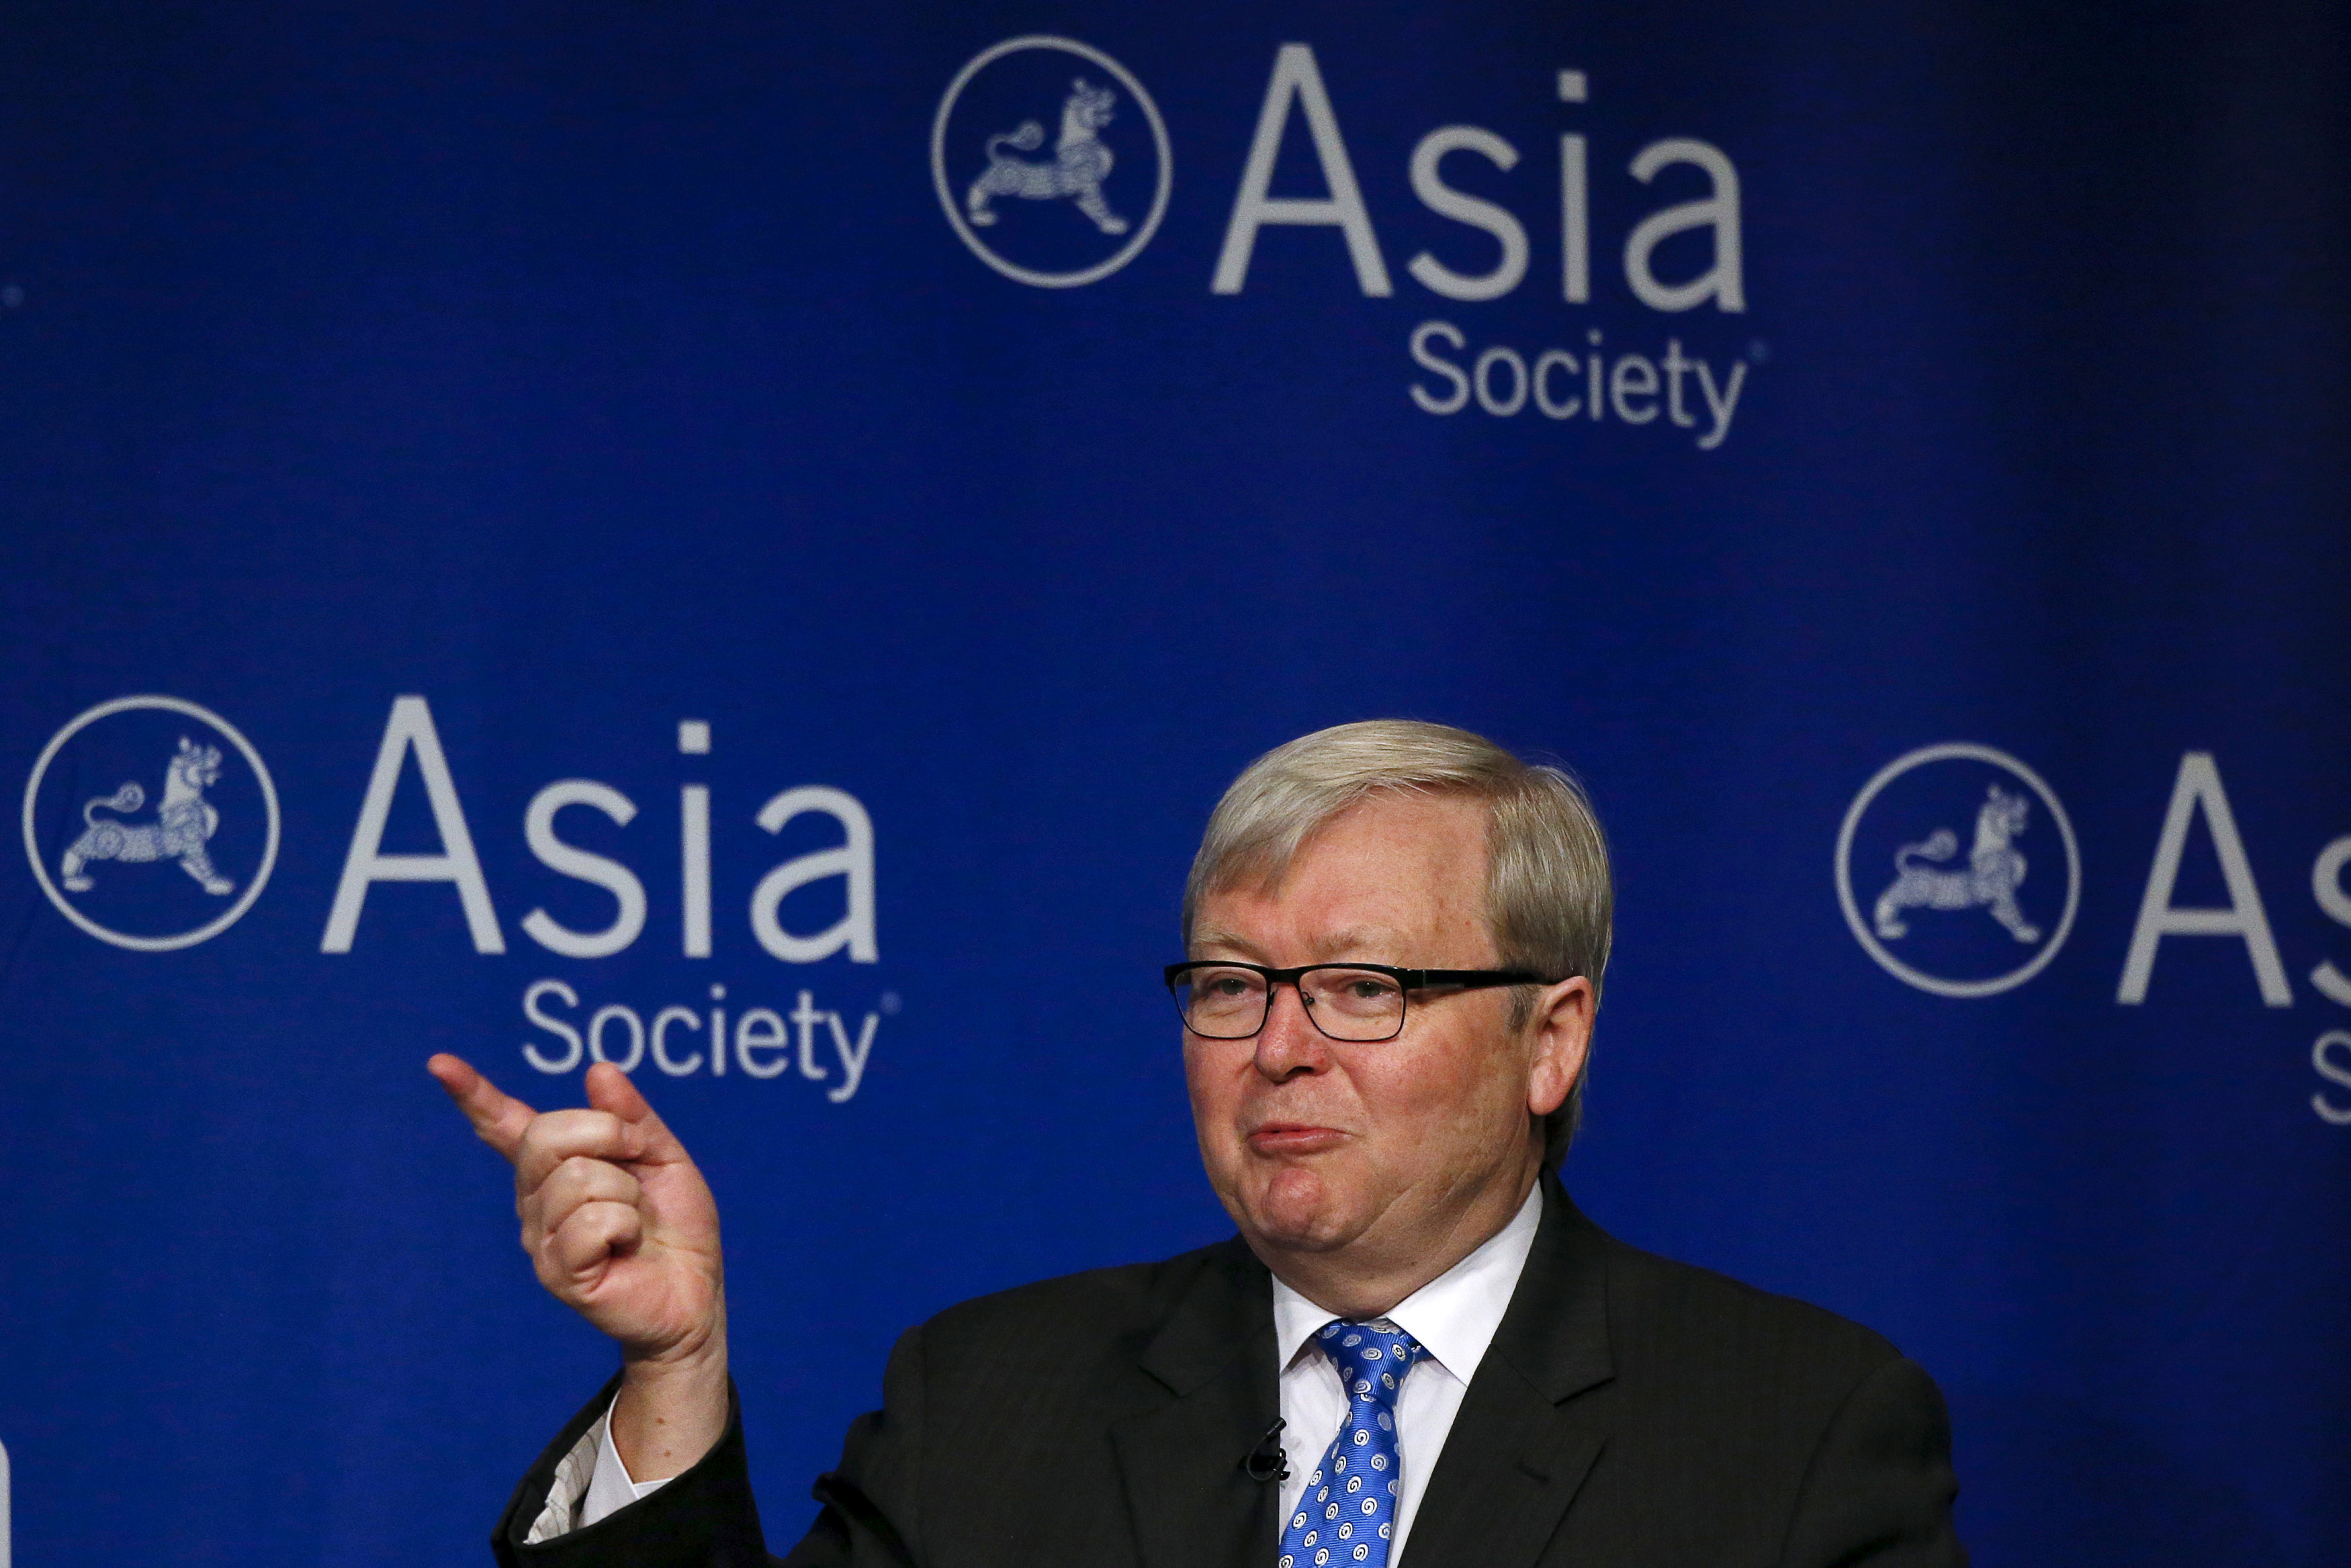 Former Australian PM Kevin Rudd withdraws candidacy for top UN job